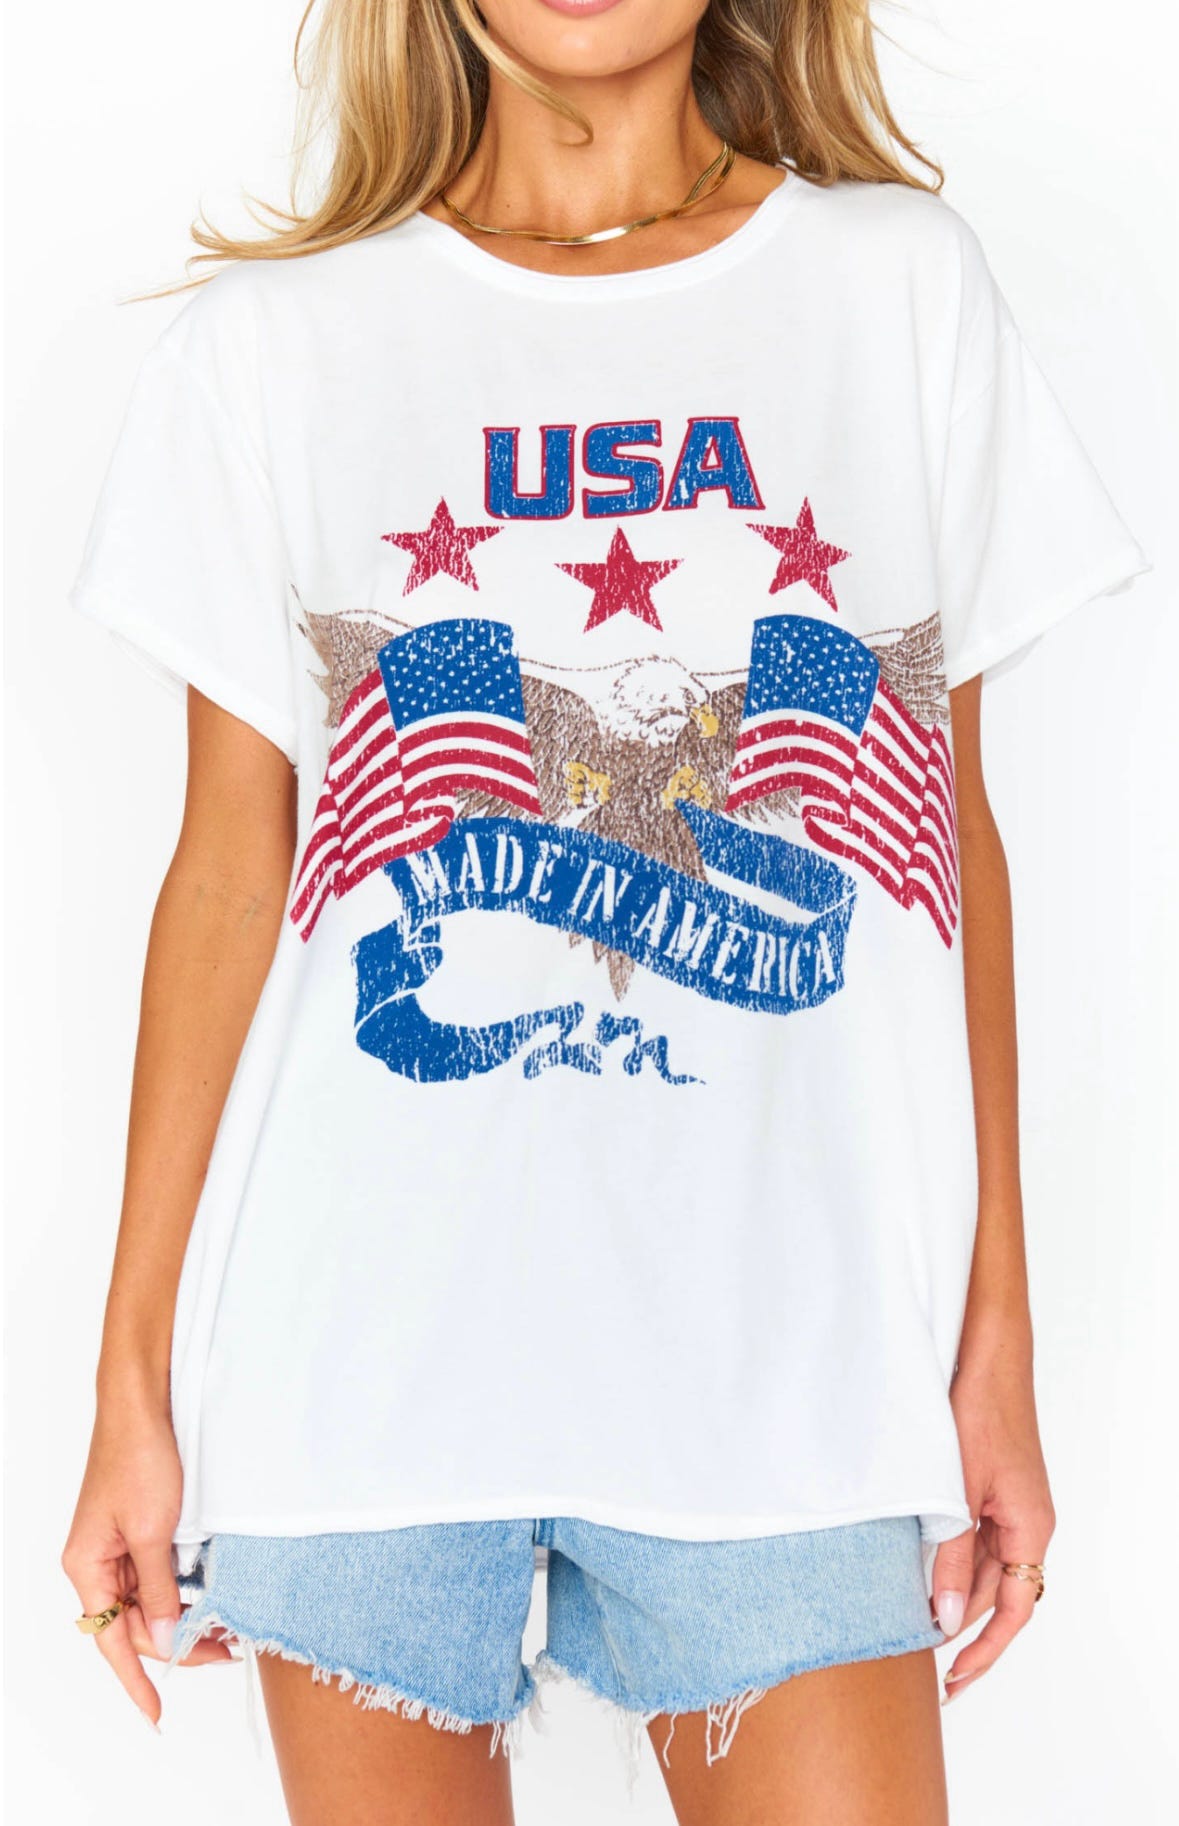 Airport Tee Made in America